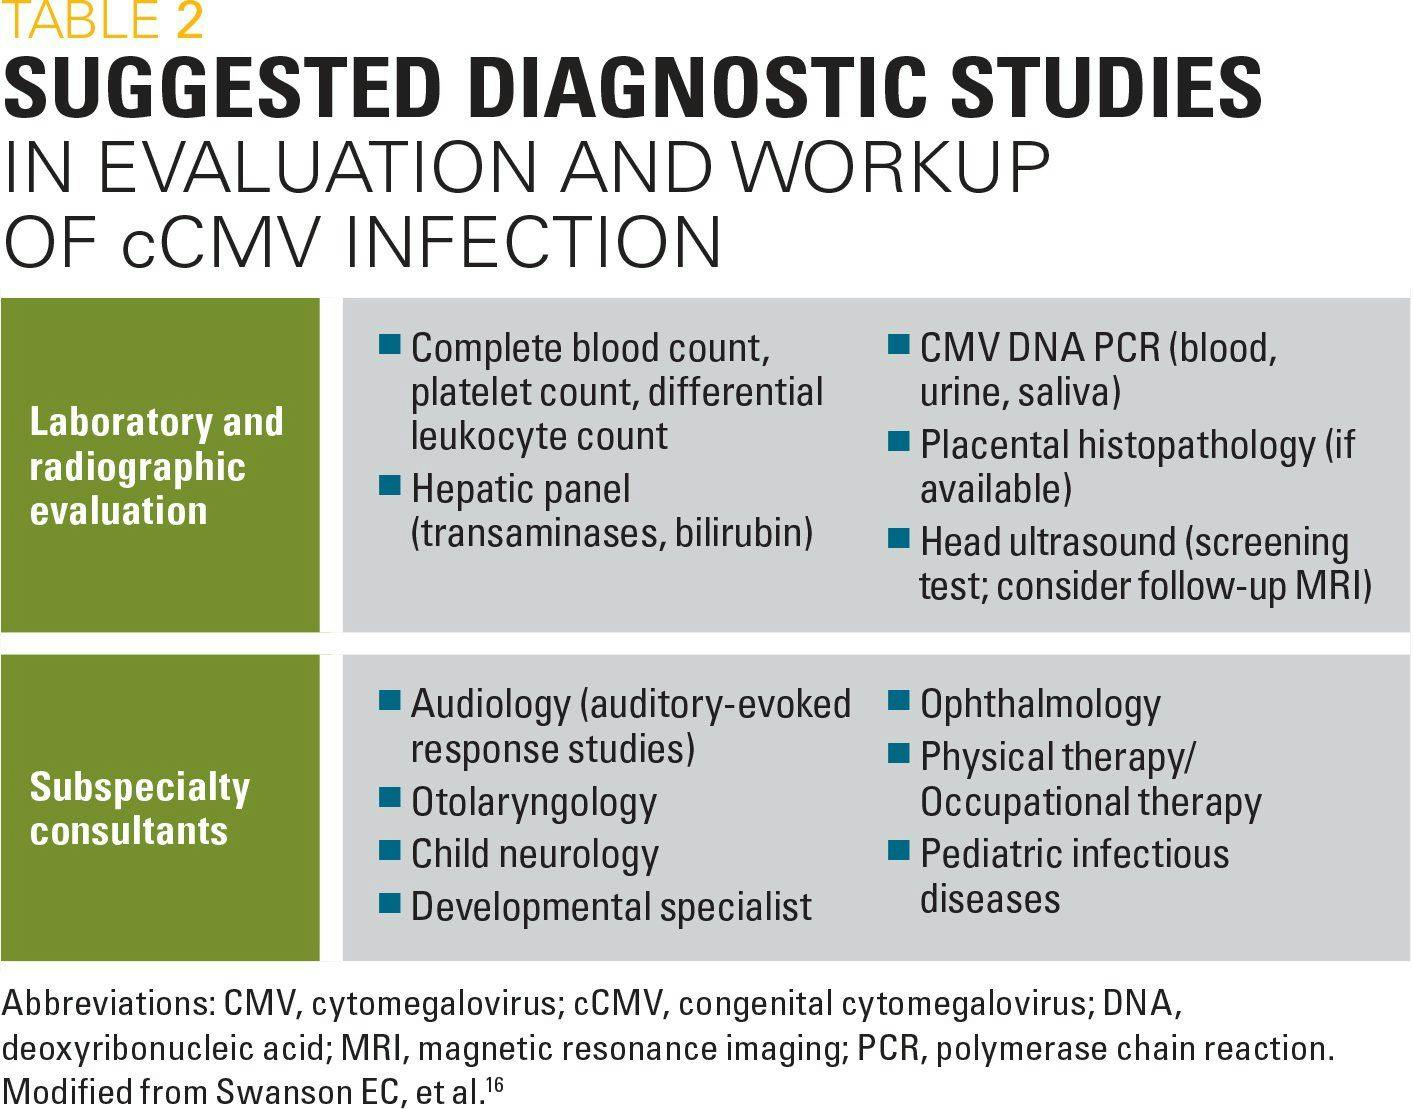 Suggested diagnostic studies in evaluation and workup of cCMV infection